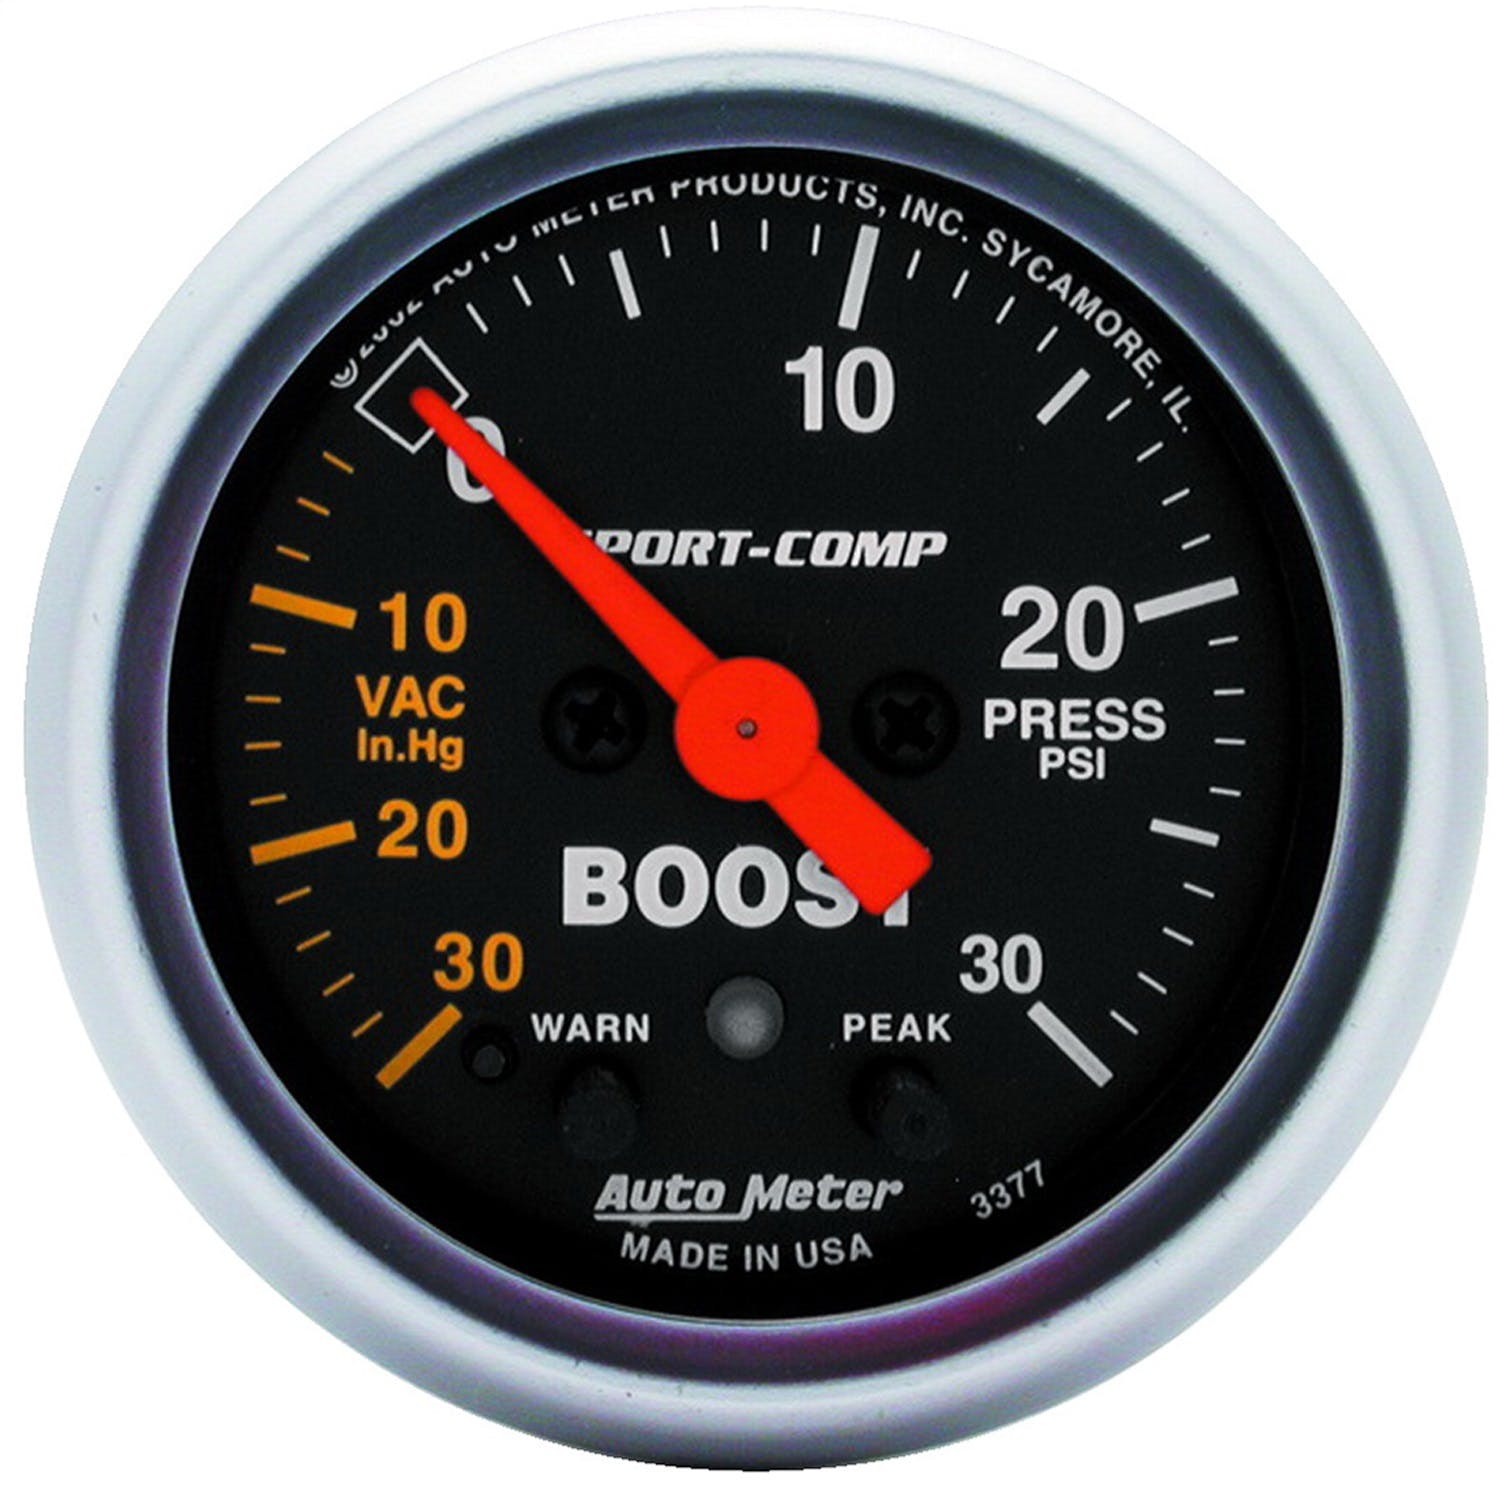 AutoMeter Products 3377 Boost/Vac 30 In. Hg/30 PSI